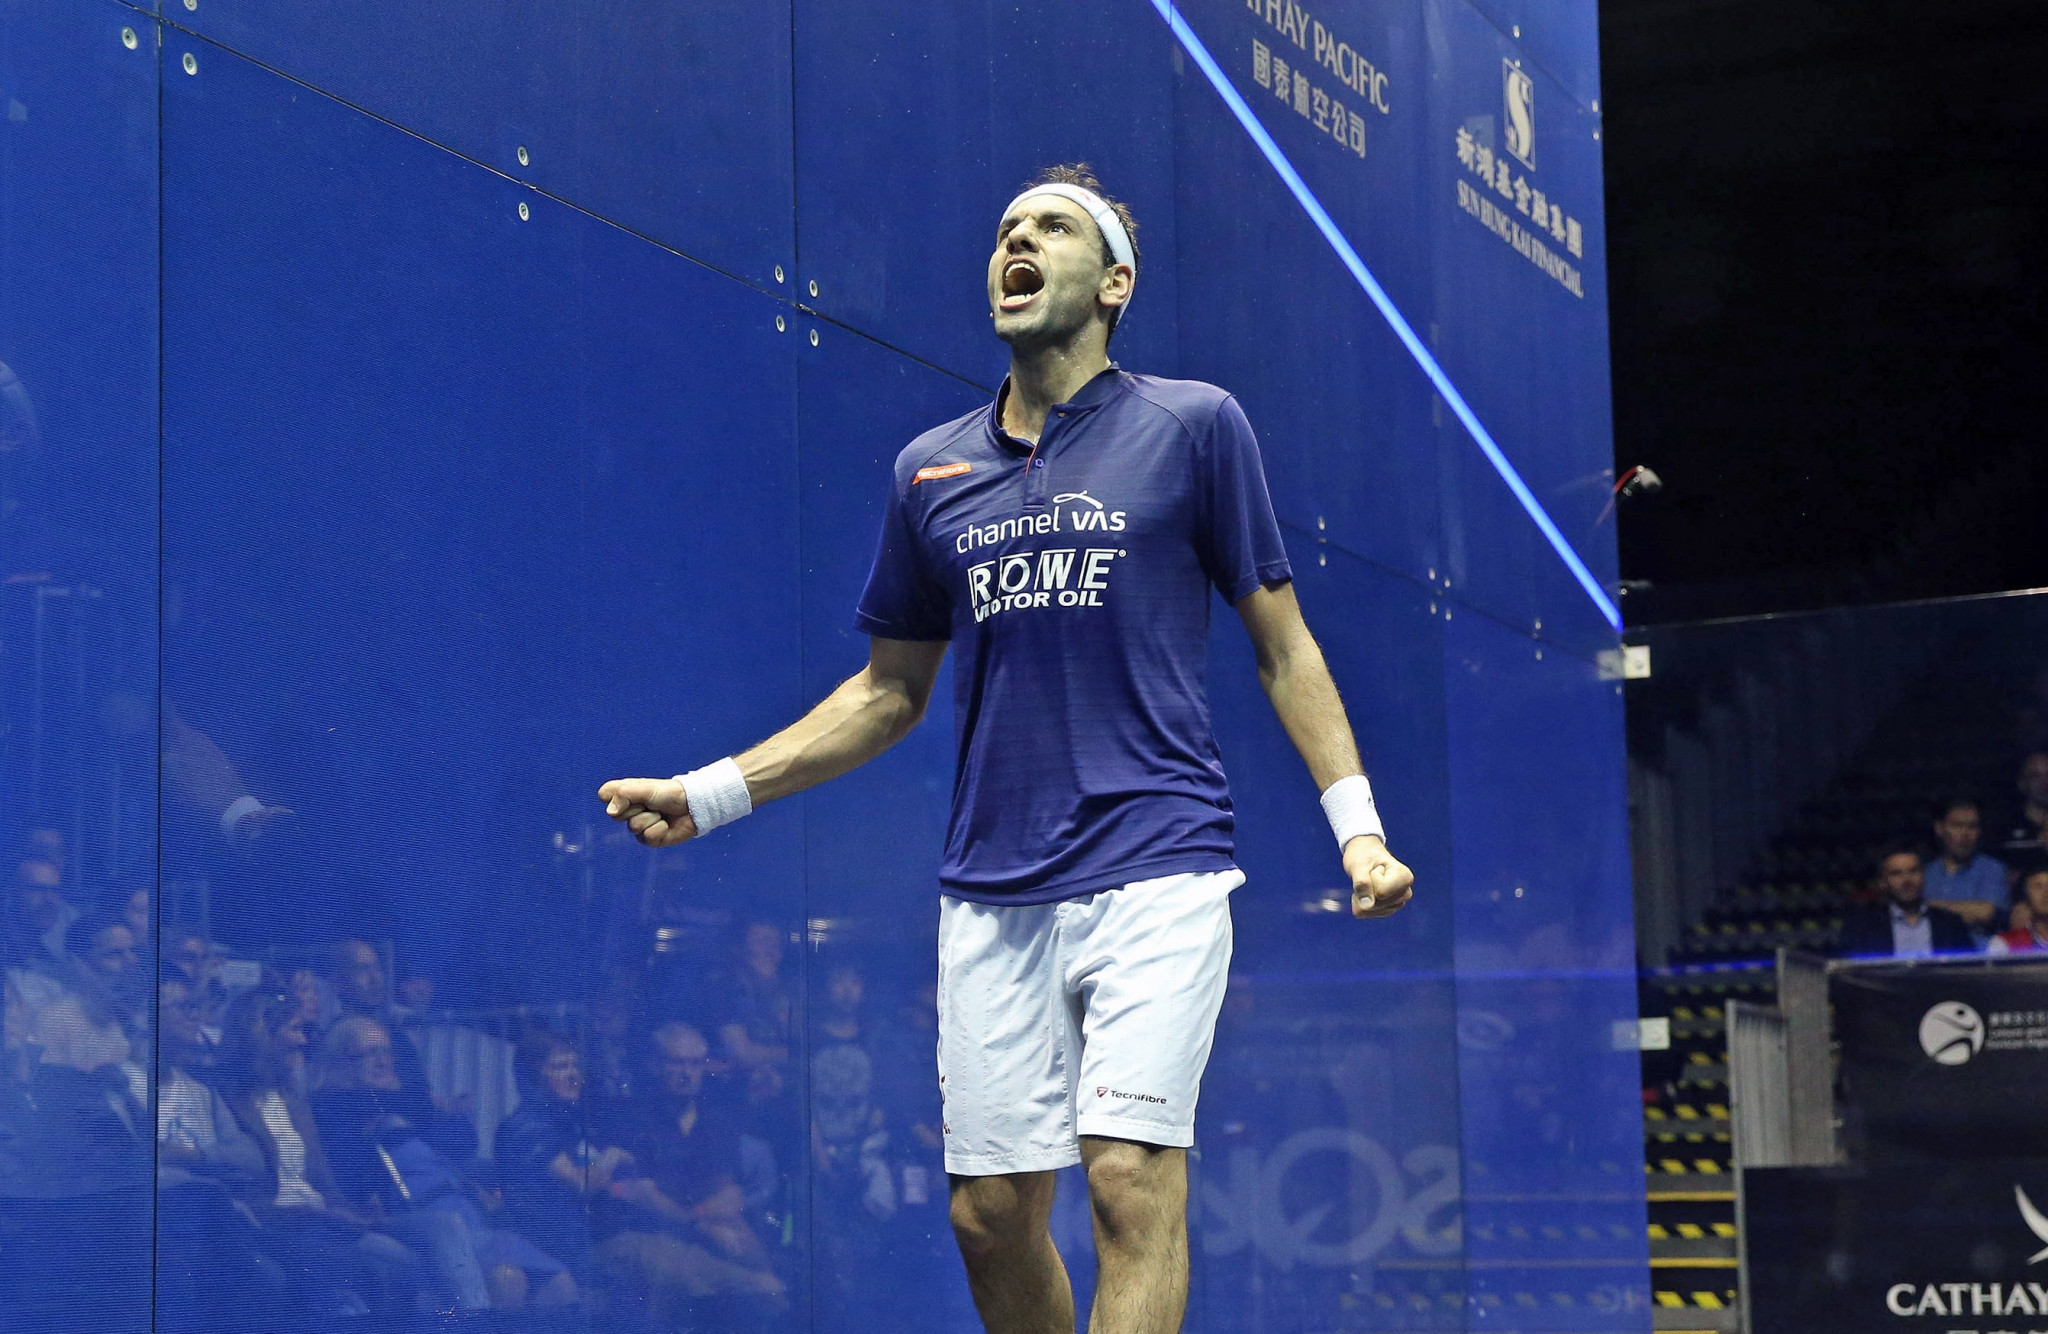 PSA Hong Kong Open to feature two all-Egyptian finals for first time